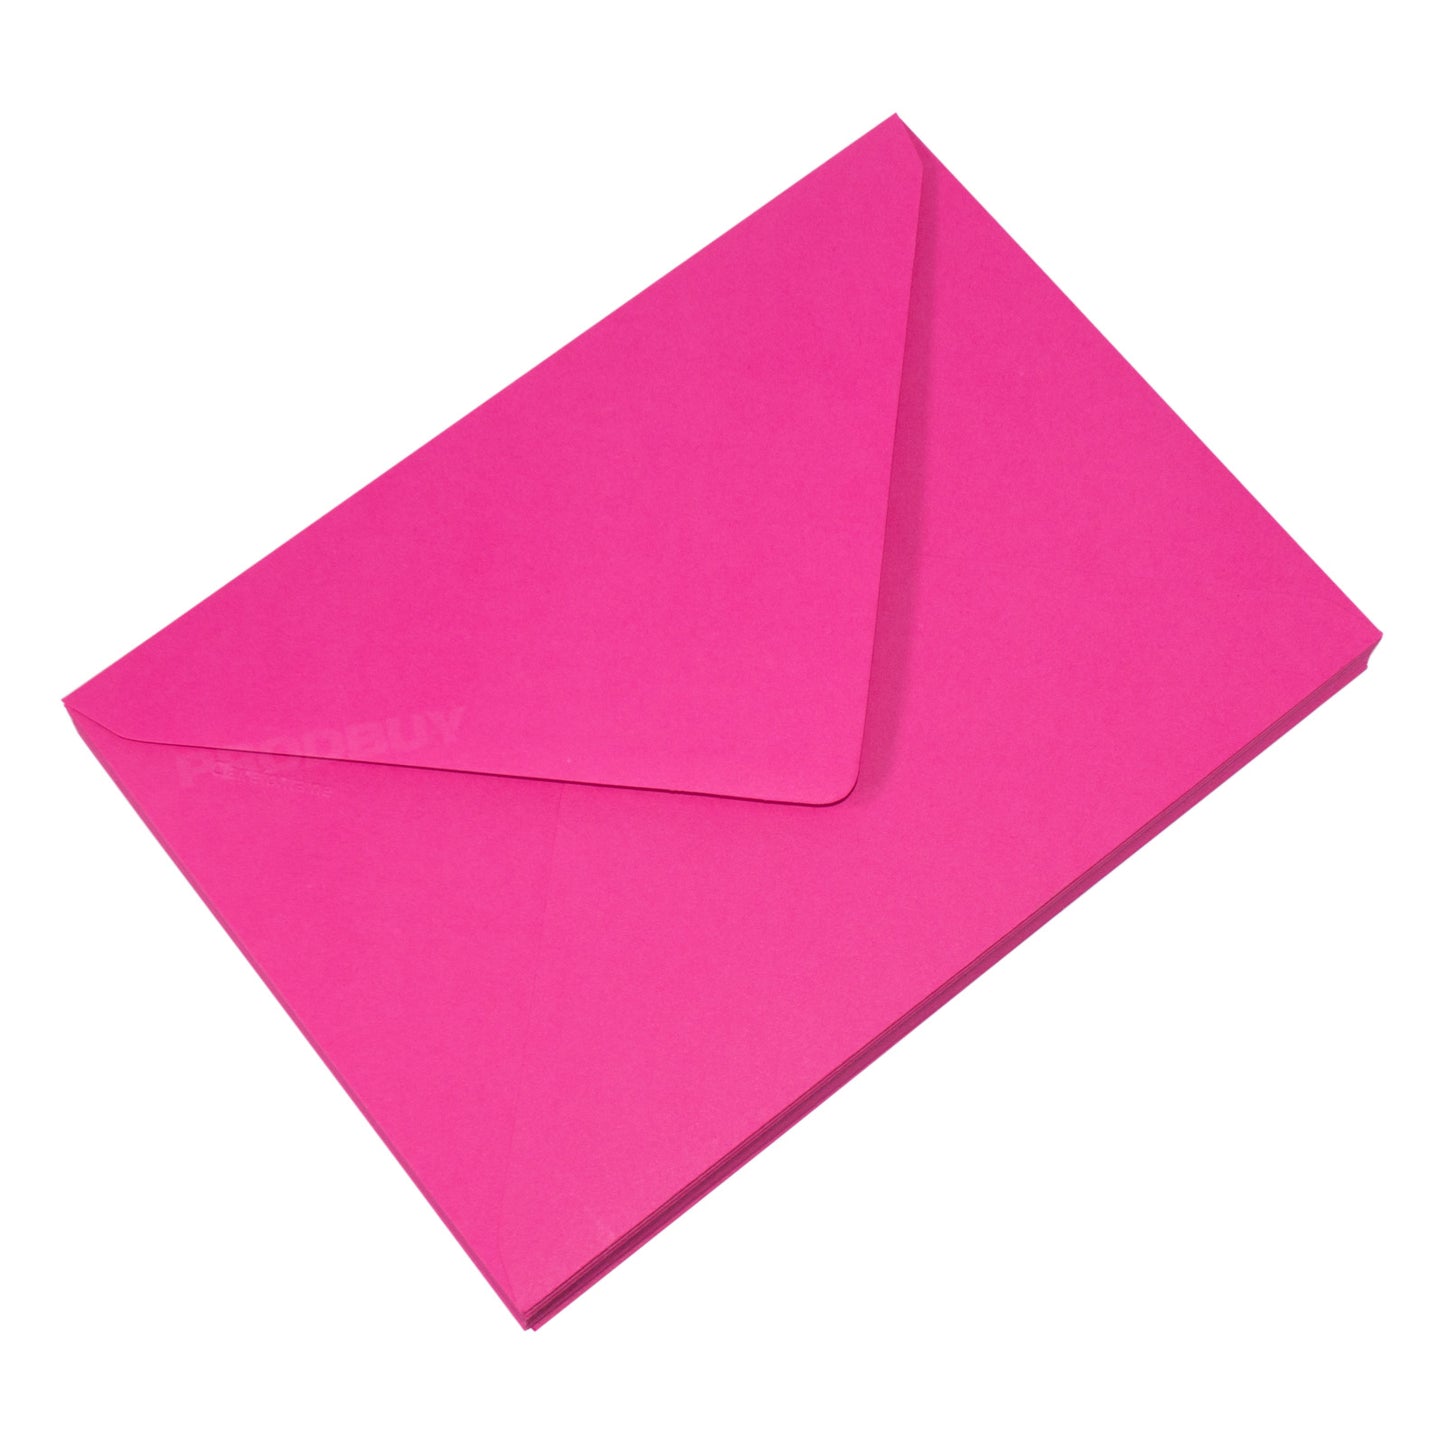 Set of 40 High Quality Plain C5 Envelopes 120gsm with 'Rose Fuchsia' Pink Colour